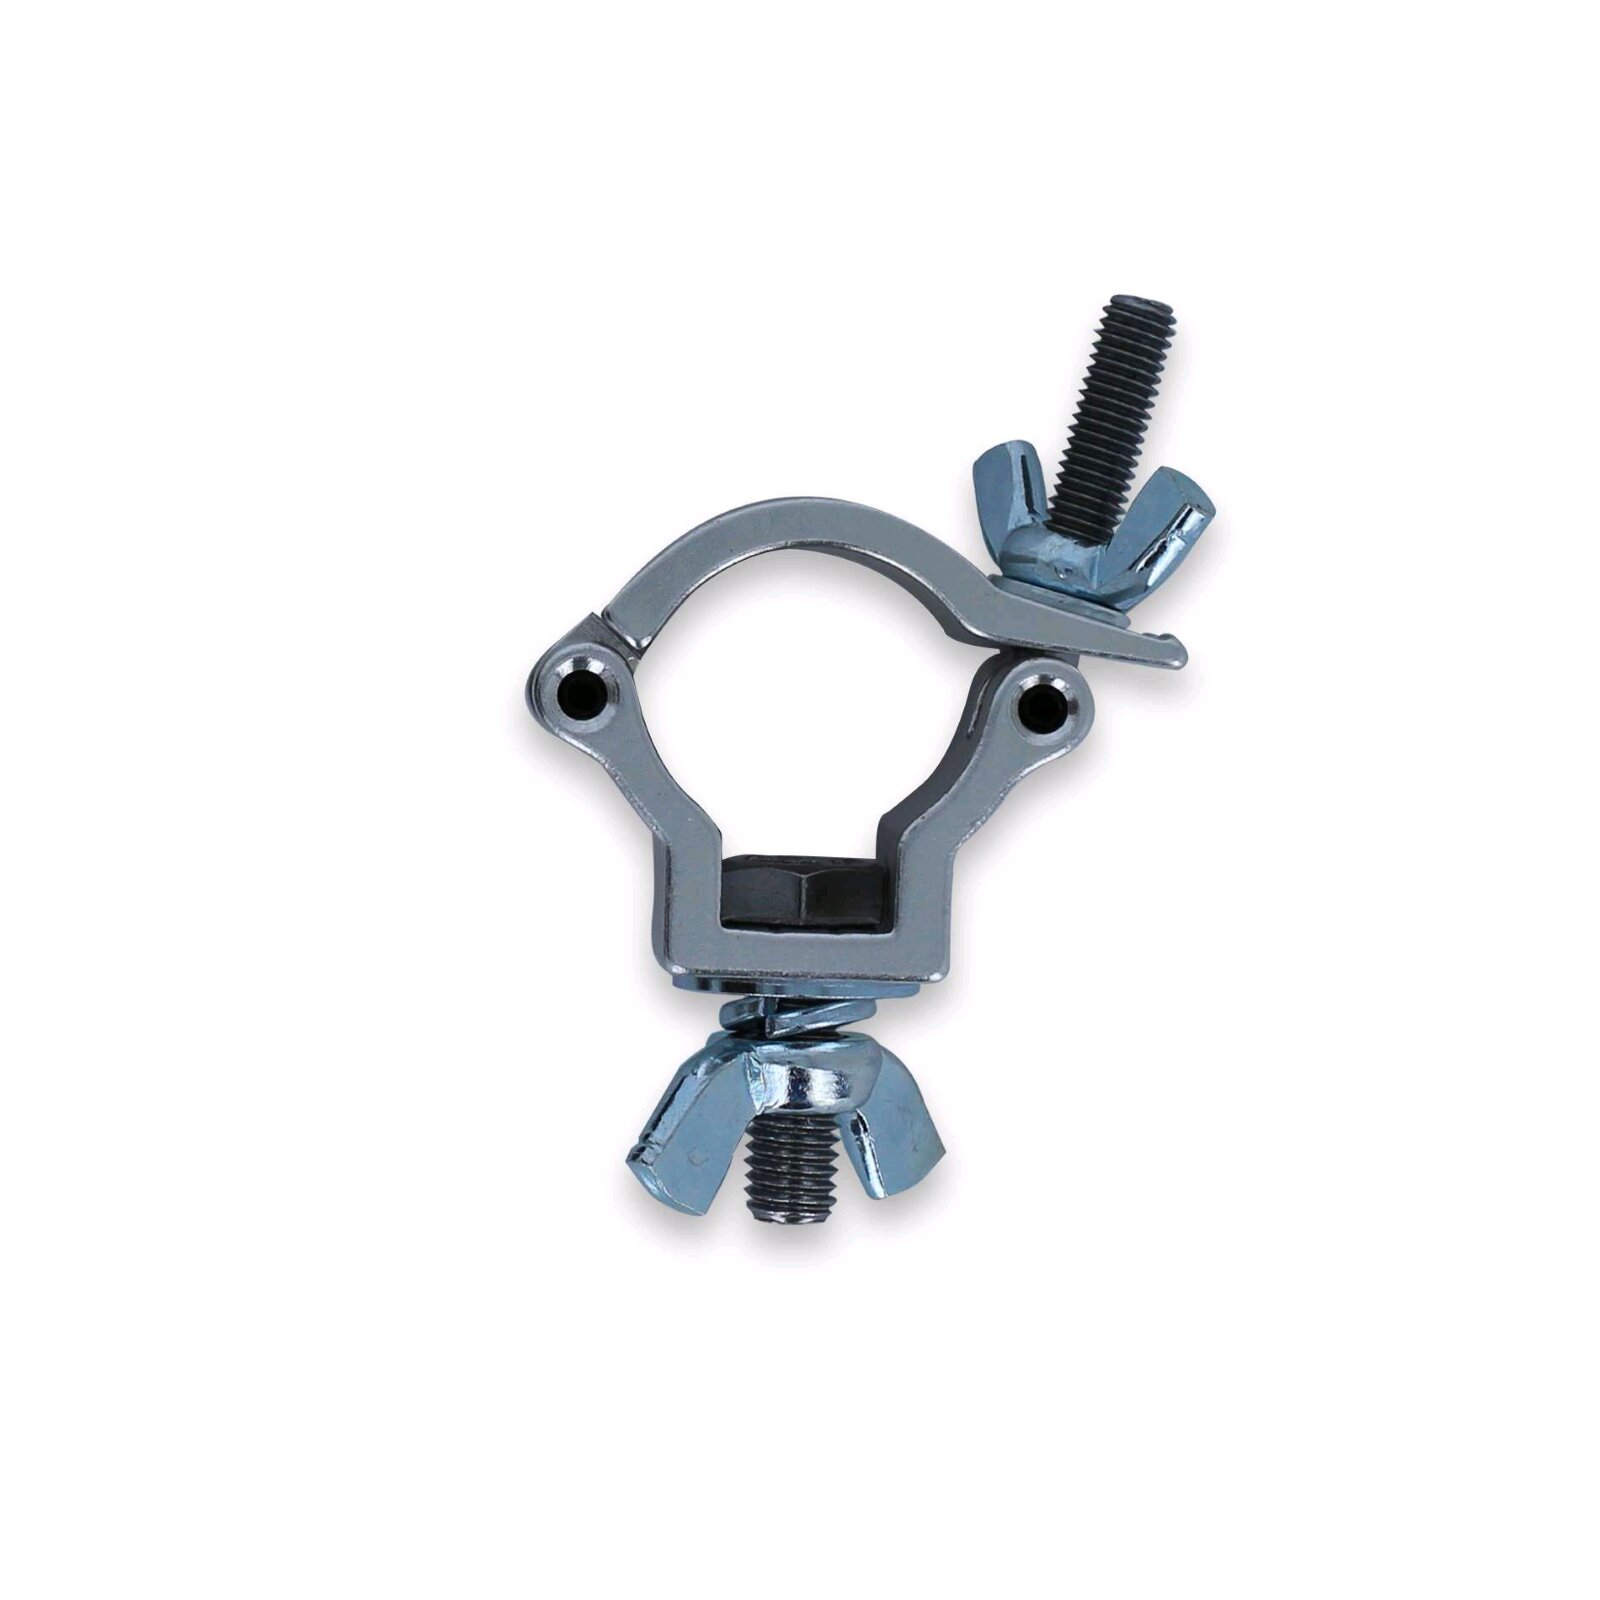 J.COLLYNS Hook clamp 32-35mm Max load 75 kg - Silver finish (CAP 35-75S) : photo 1